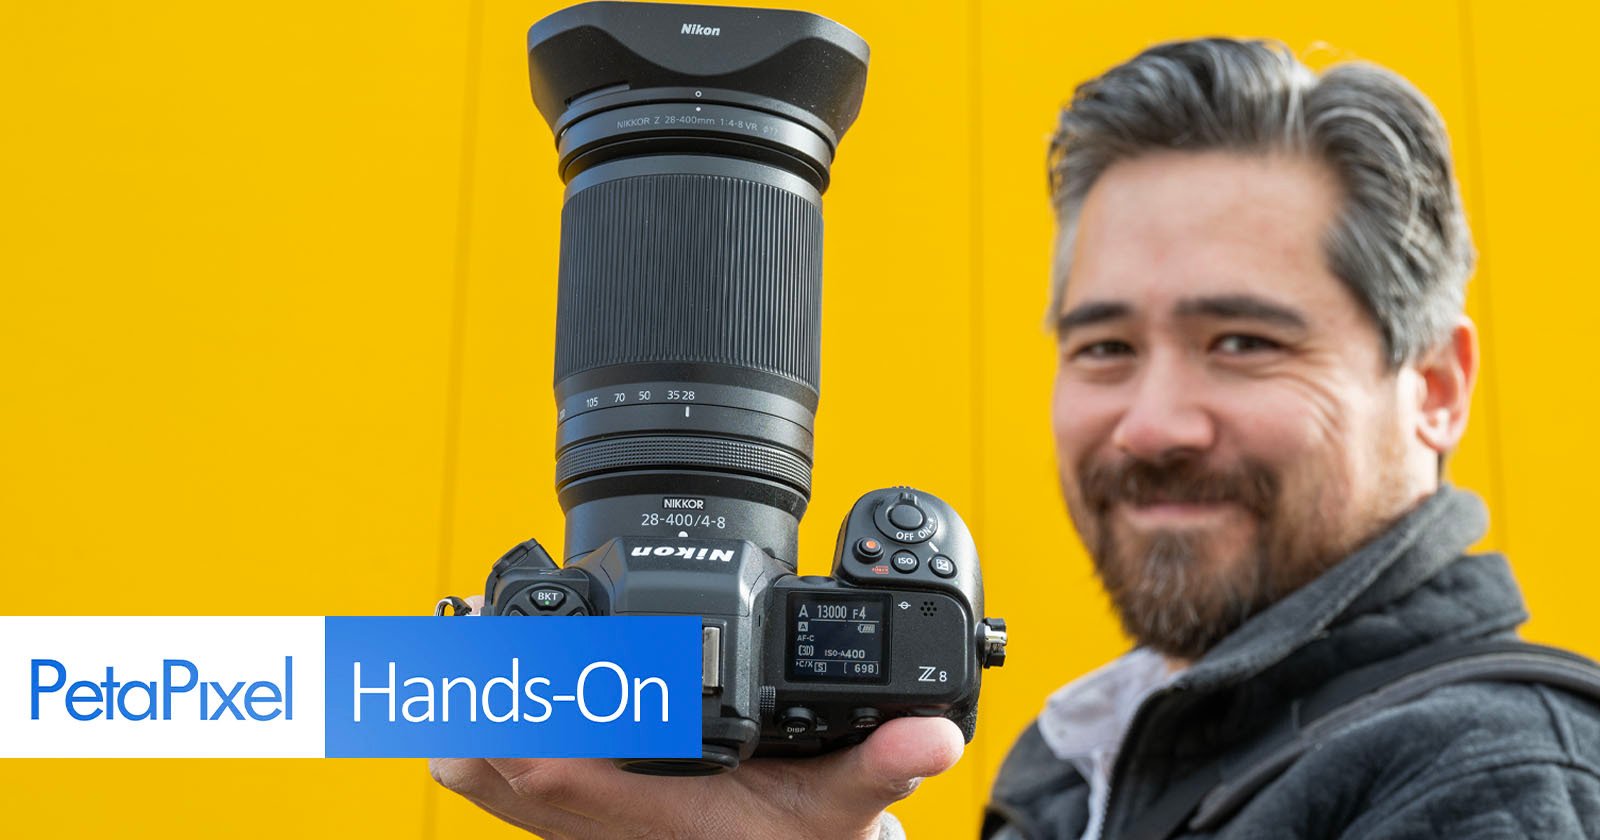 Nikon Z 28-400mm f/4-8 VR hands-on: One lens covers it all